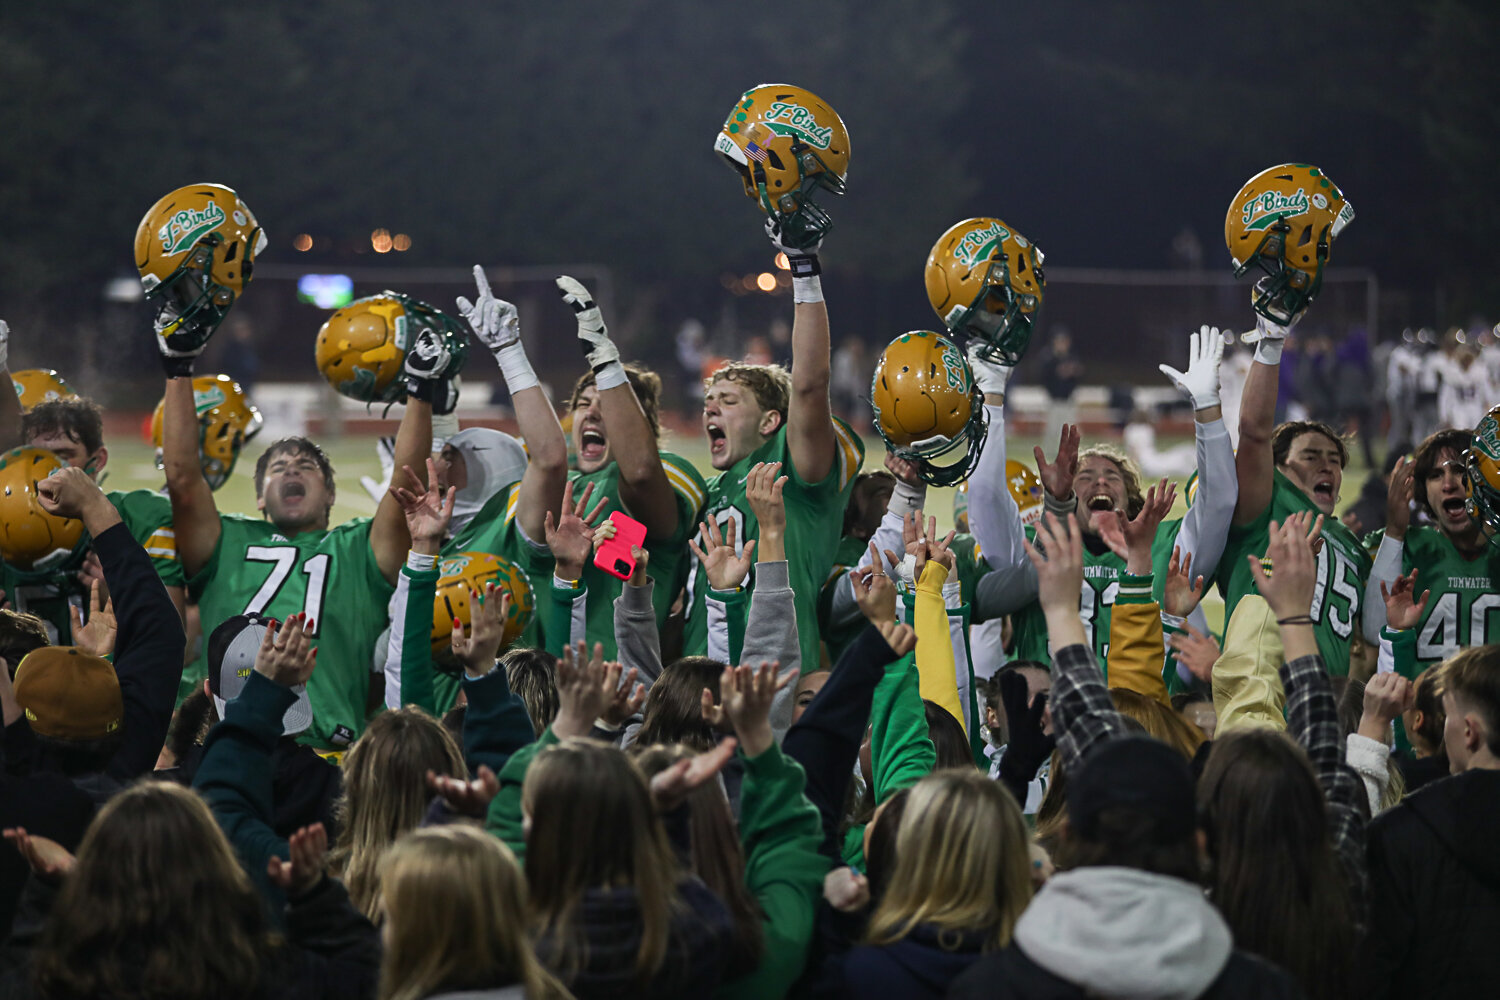 Tumwater players celebrate their 19-17 win over North Kitsap Nov. 25.